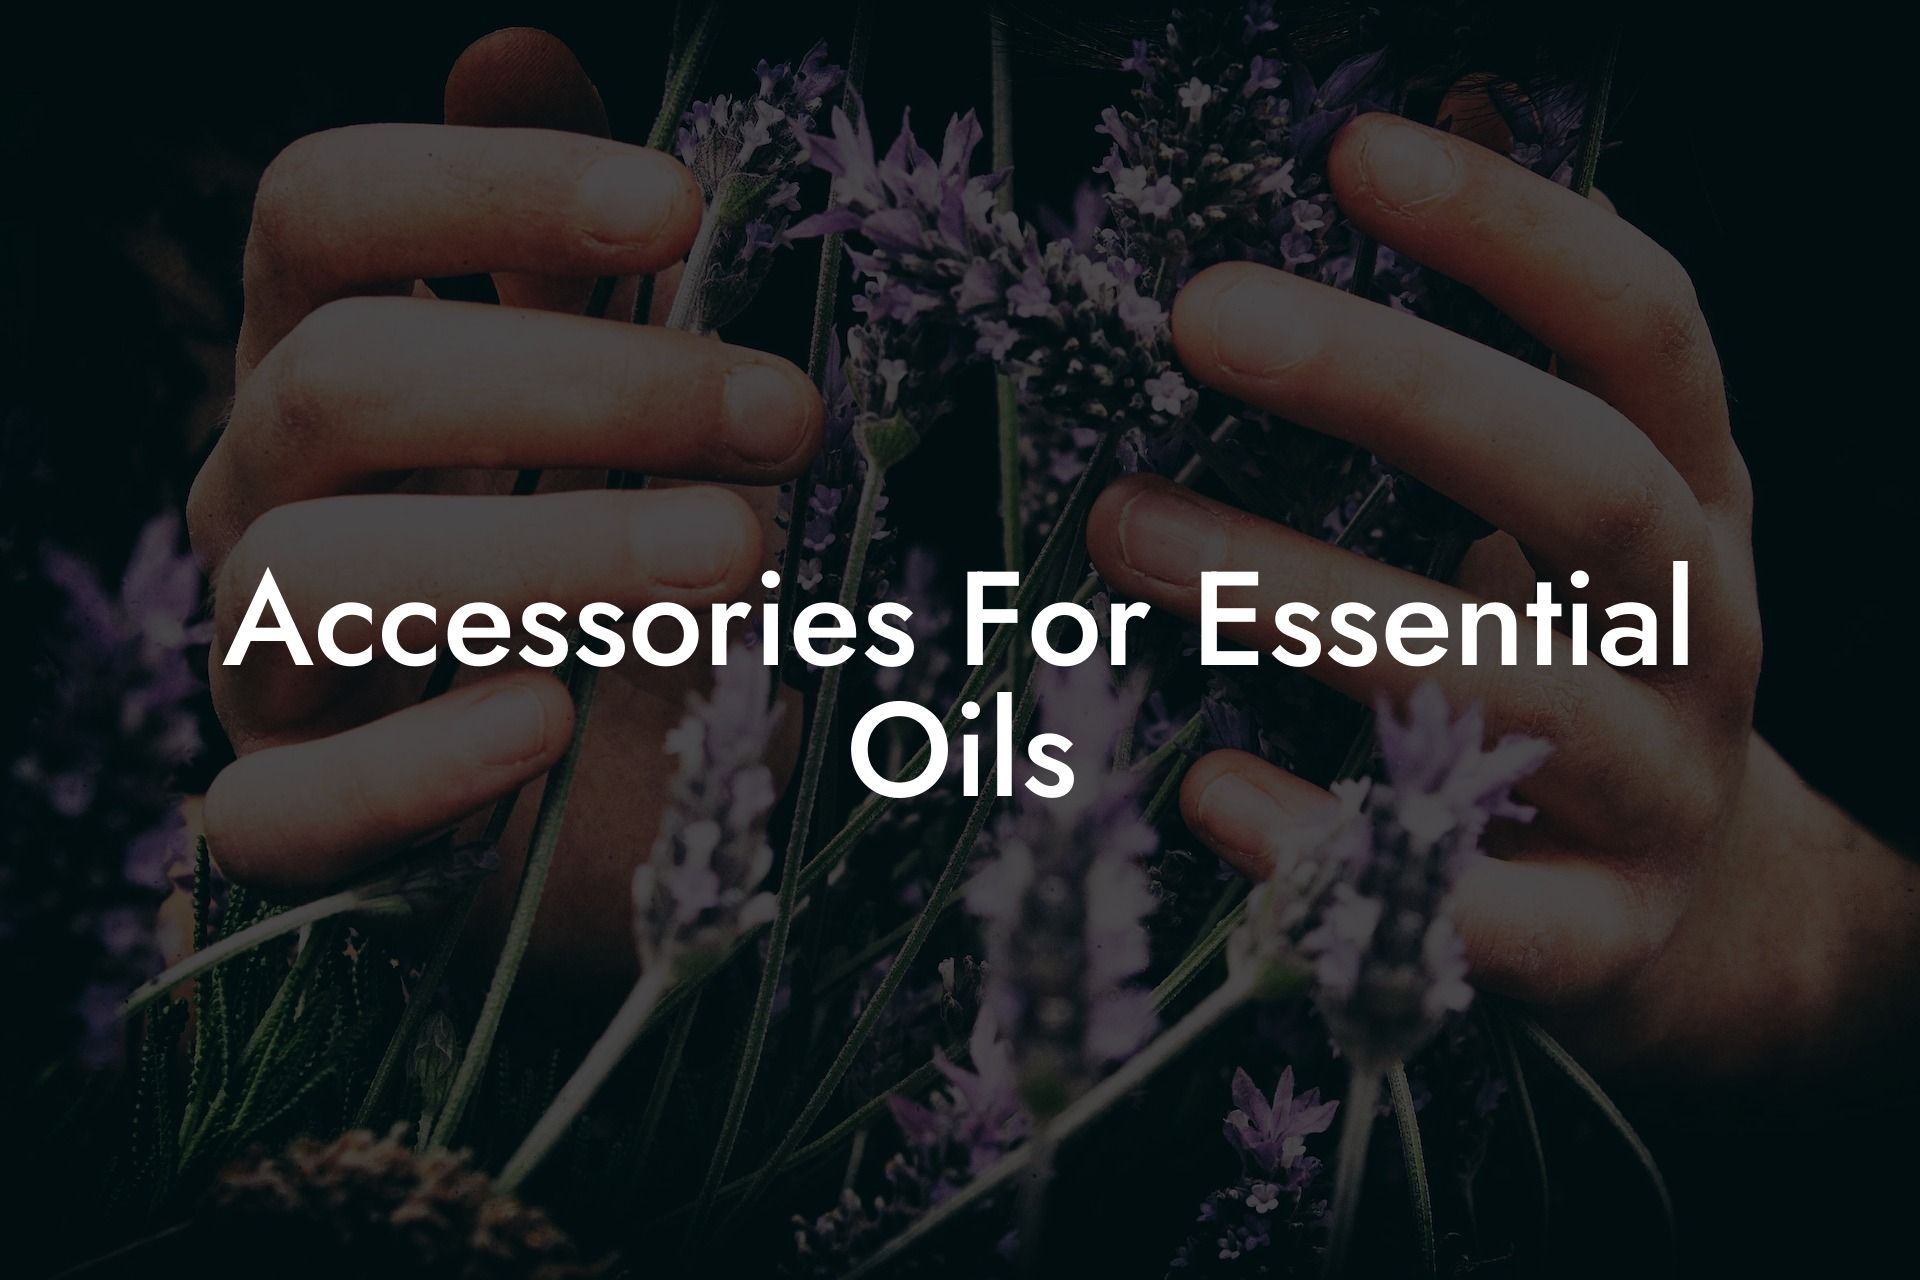 Accessories For Essential Oils